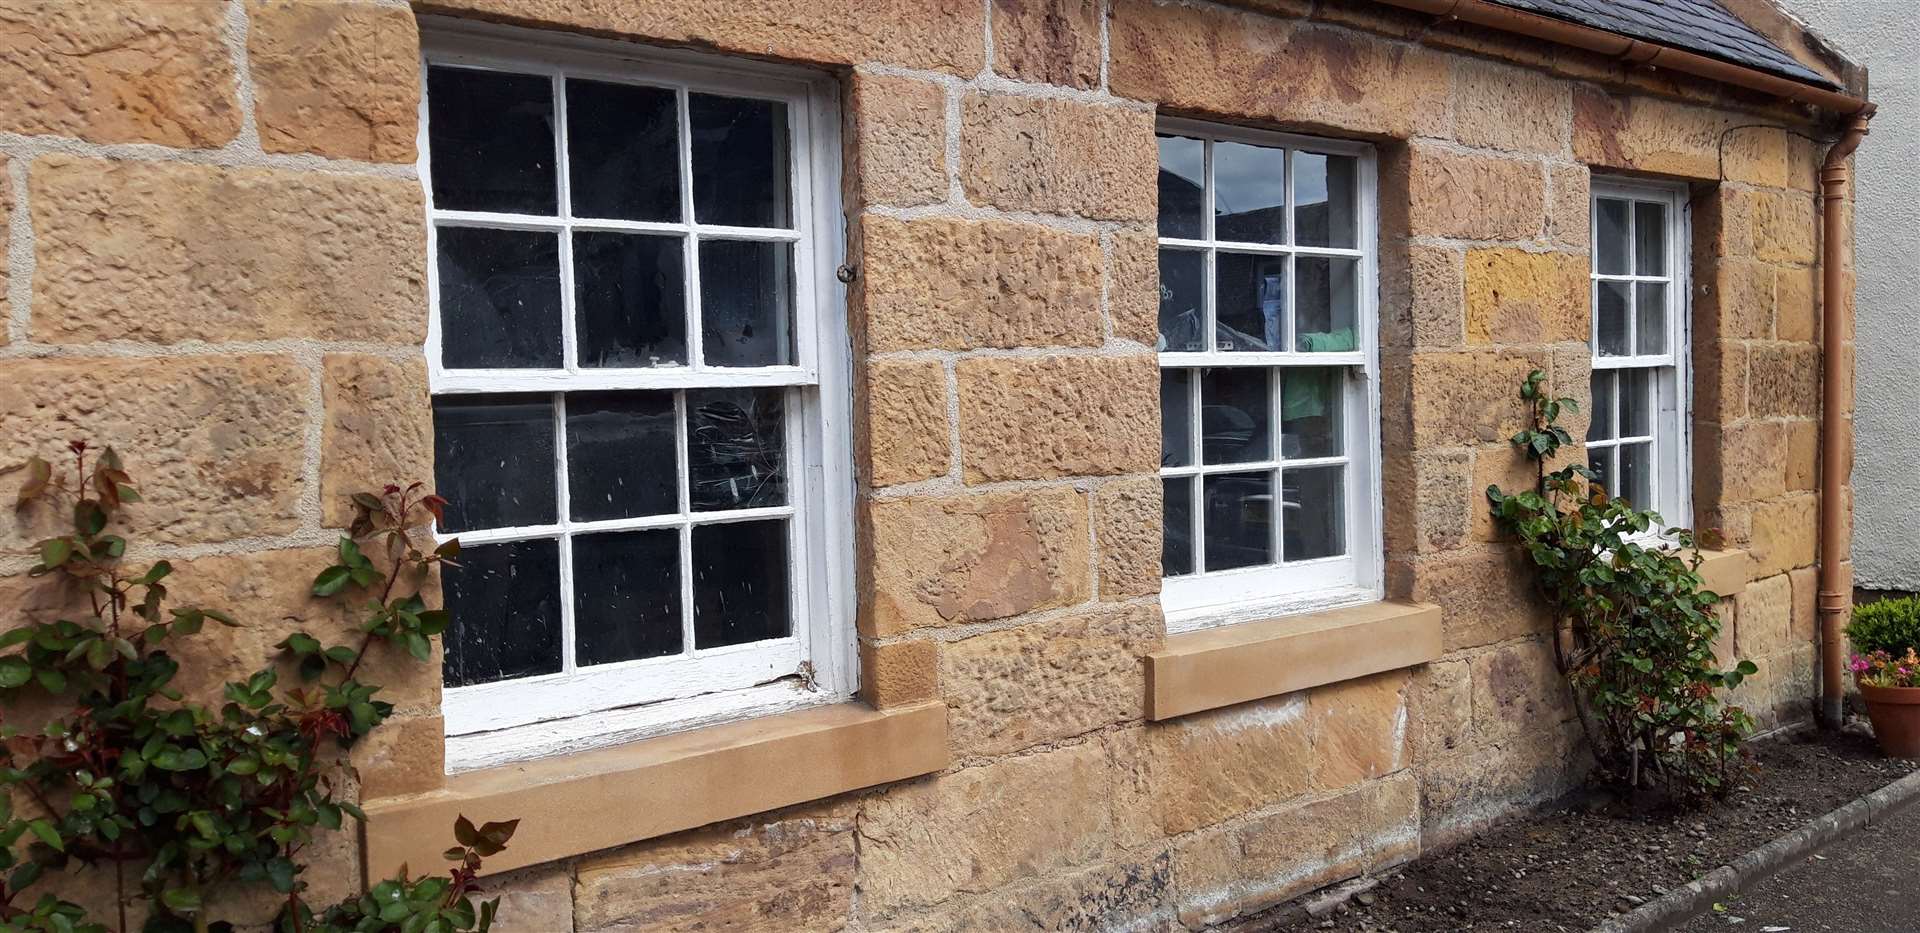 The former vet’s surgery at Dornoch is to become a home.